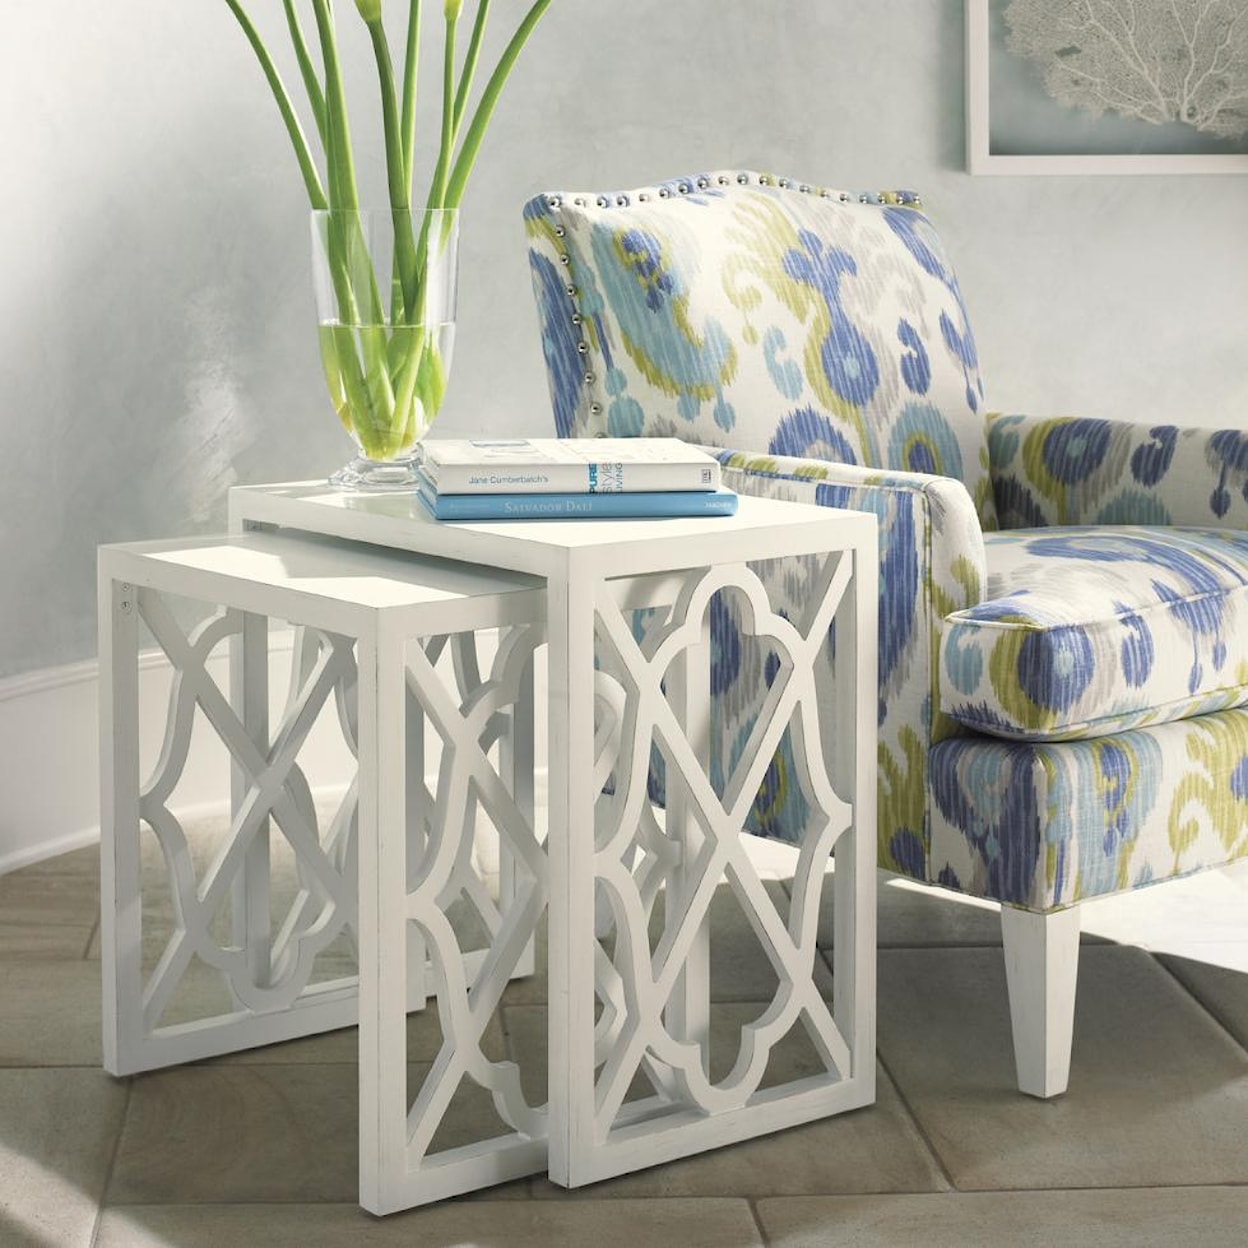 Tommy Bahama Home Ivory Key Stovell Ferry Nesting Tables